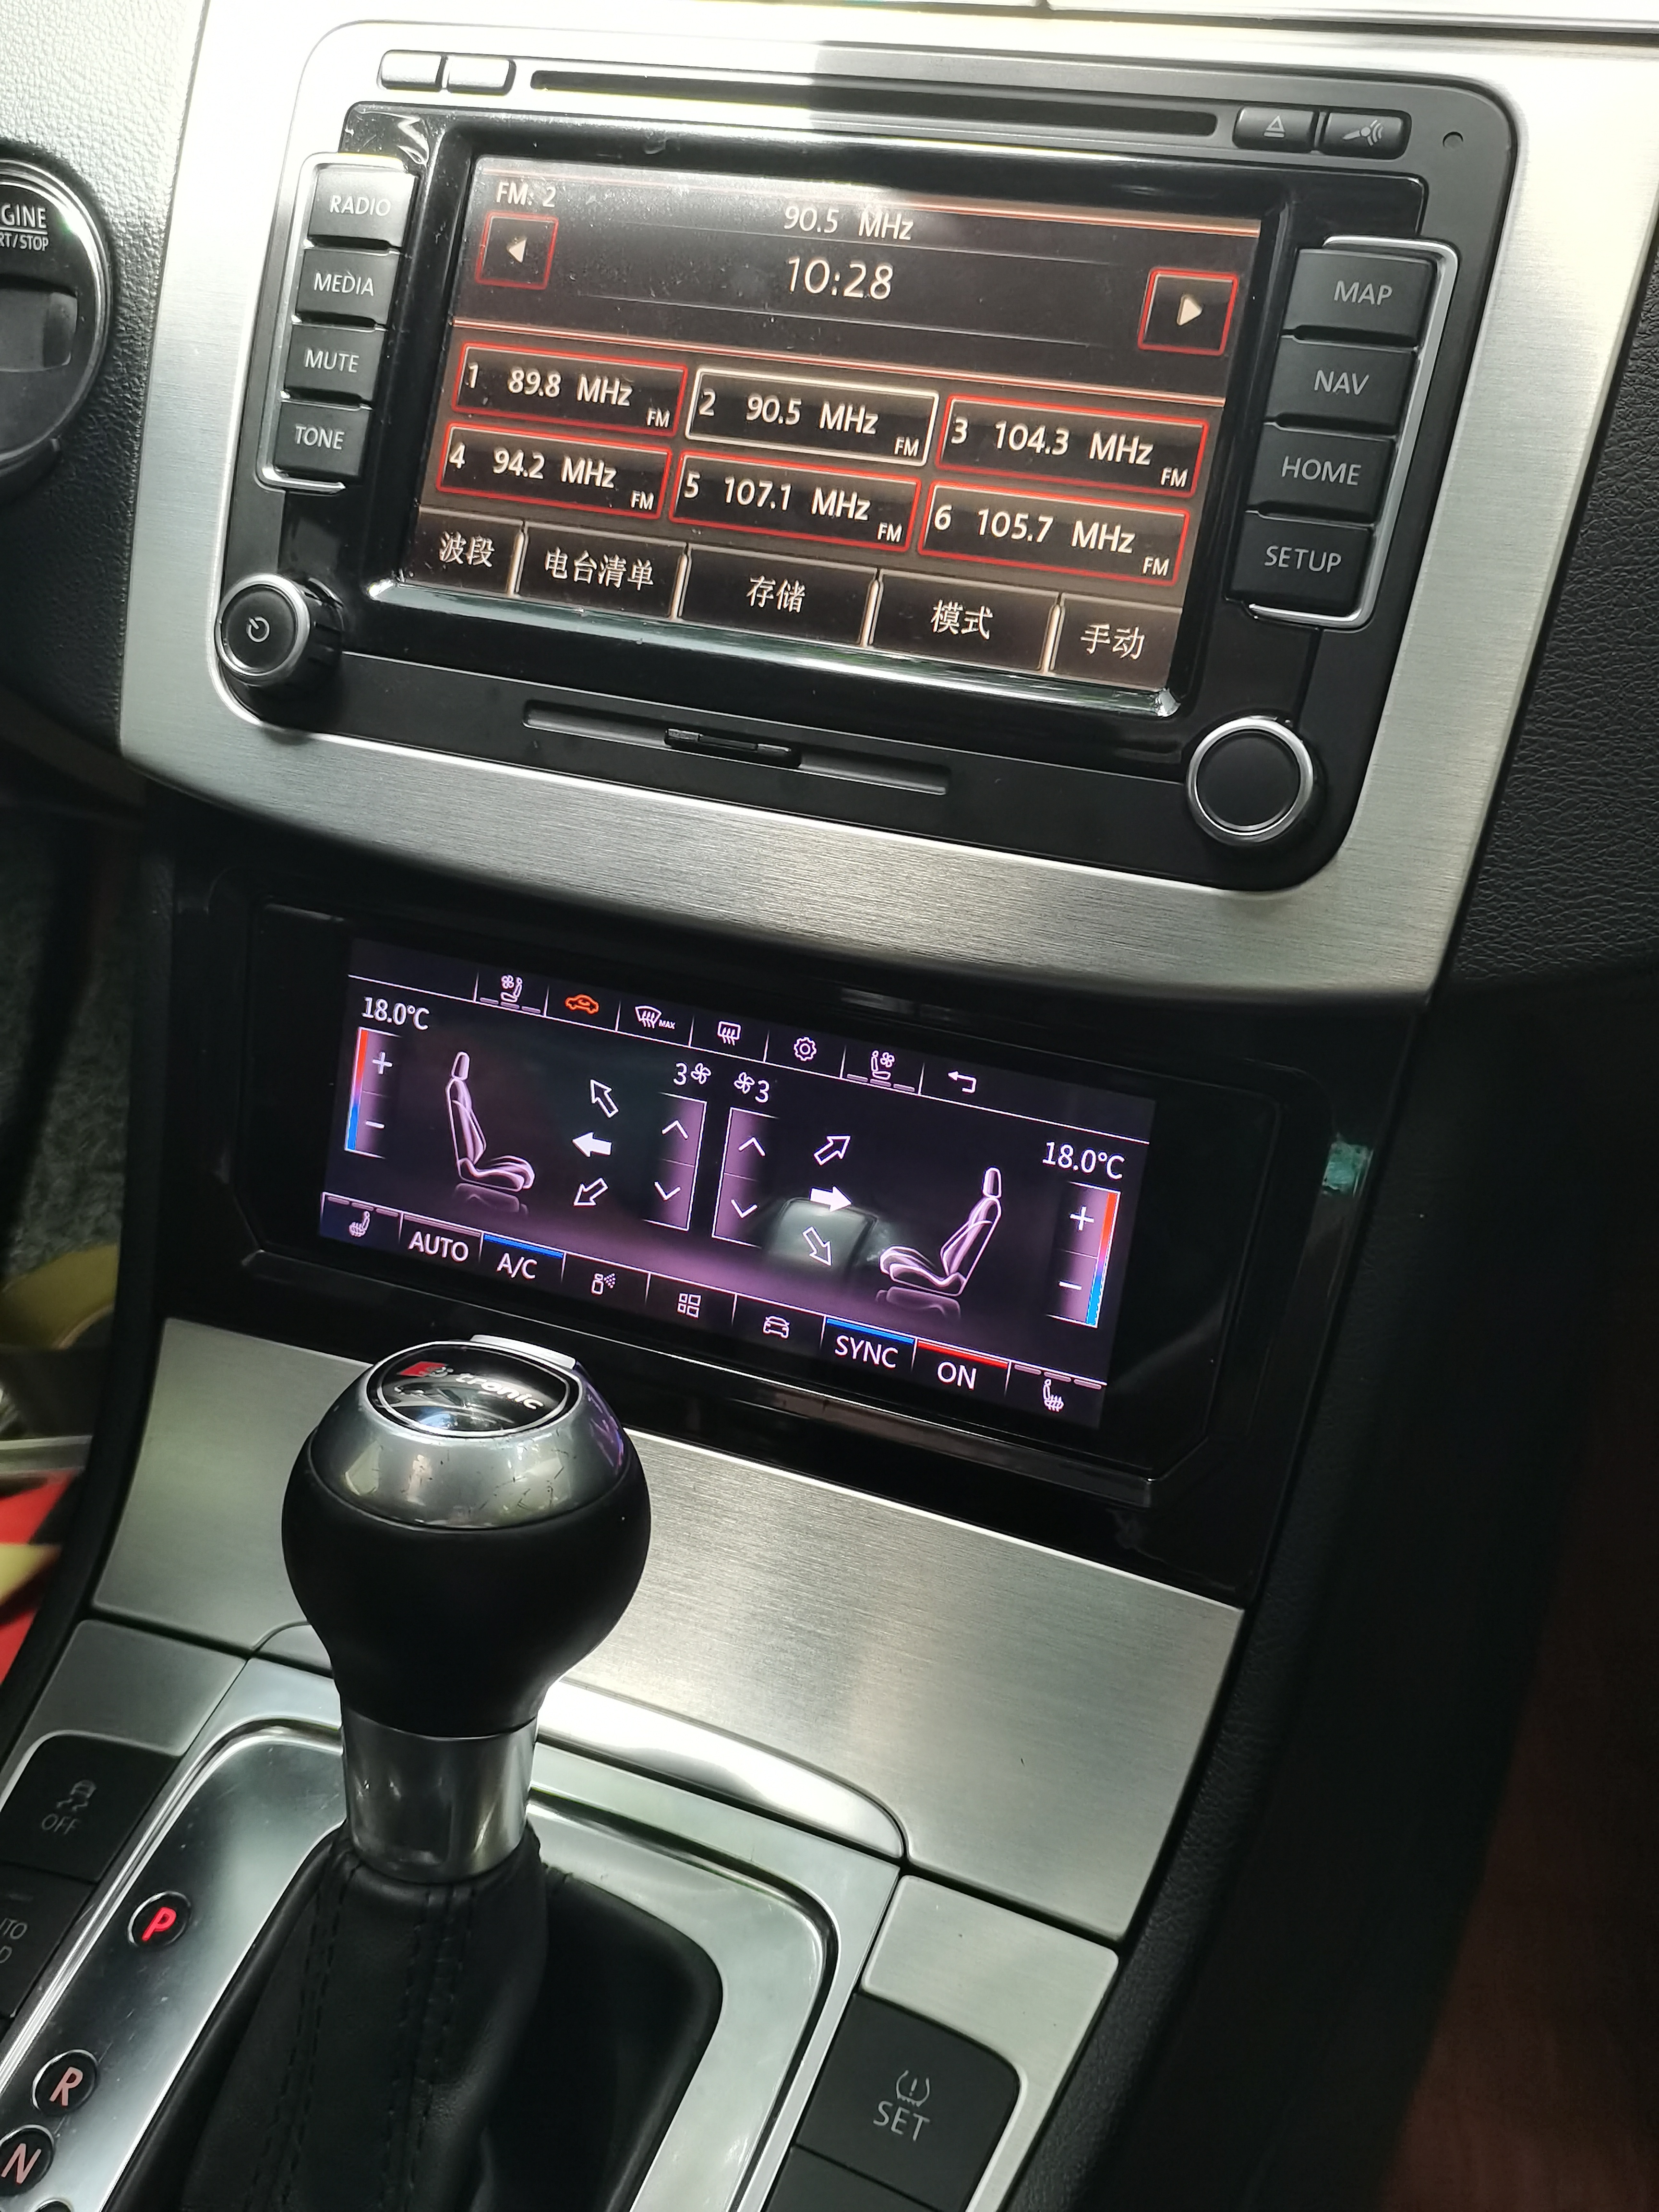 Upgrade Your Volkswagen Car with Touch Screen Climate Control Panel